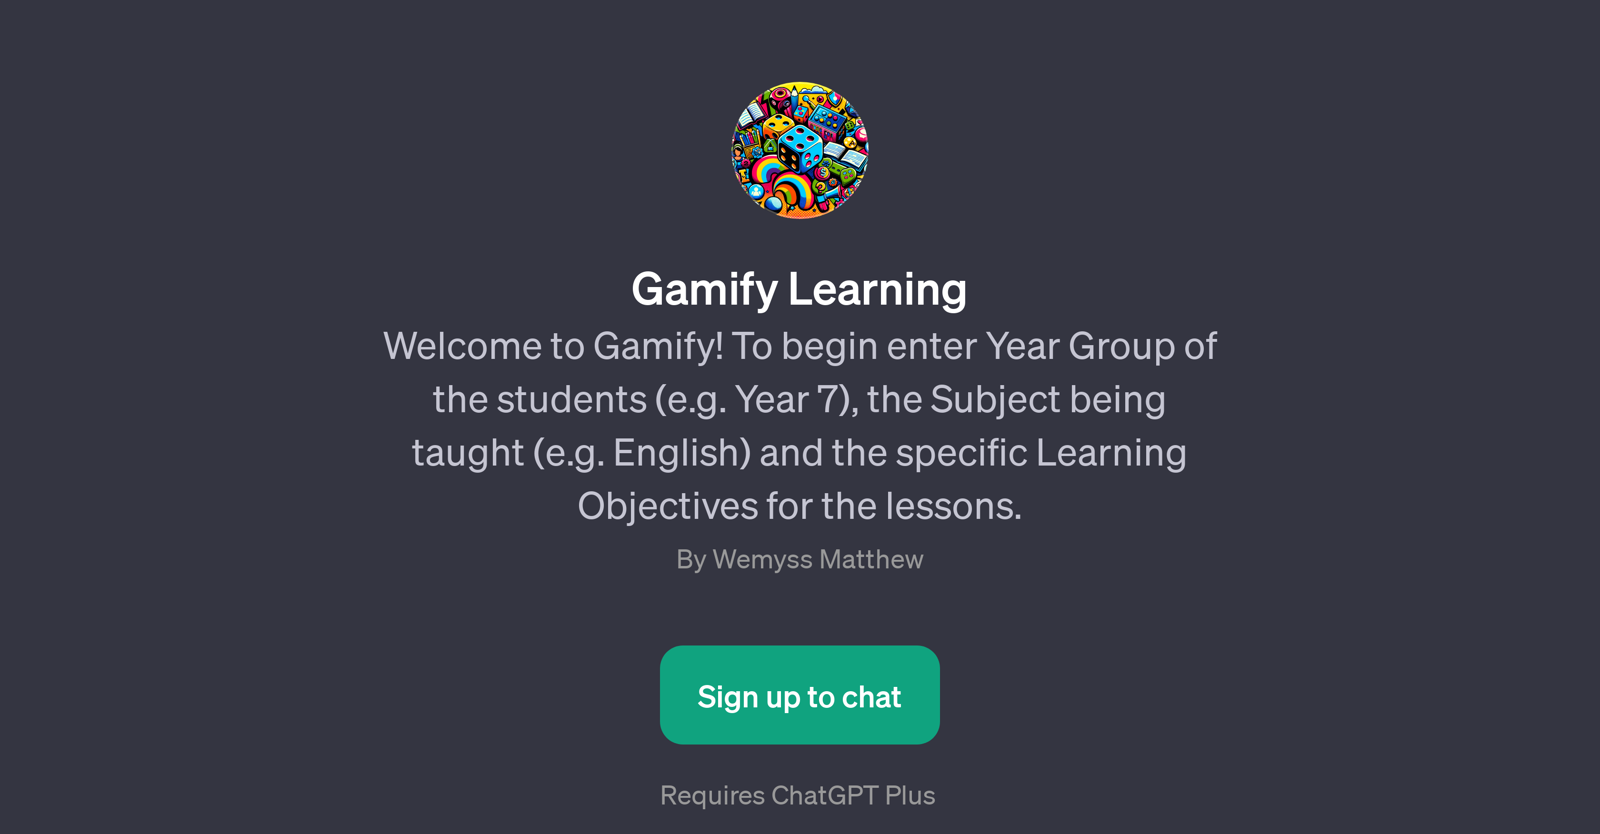 Gamify Learning website